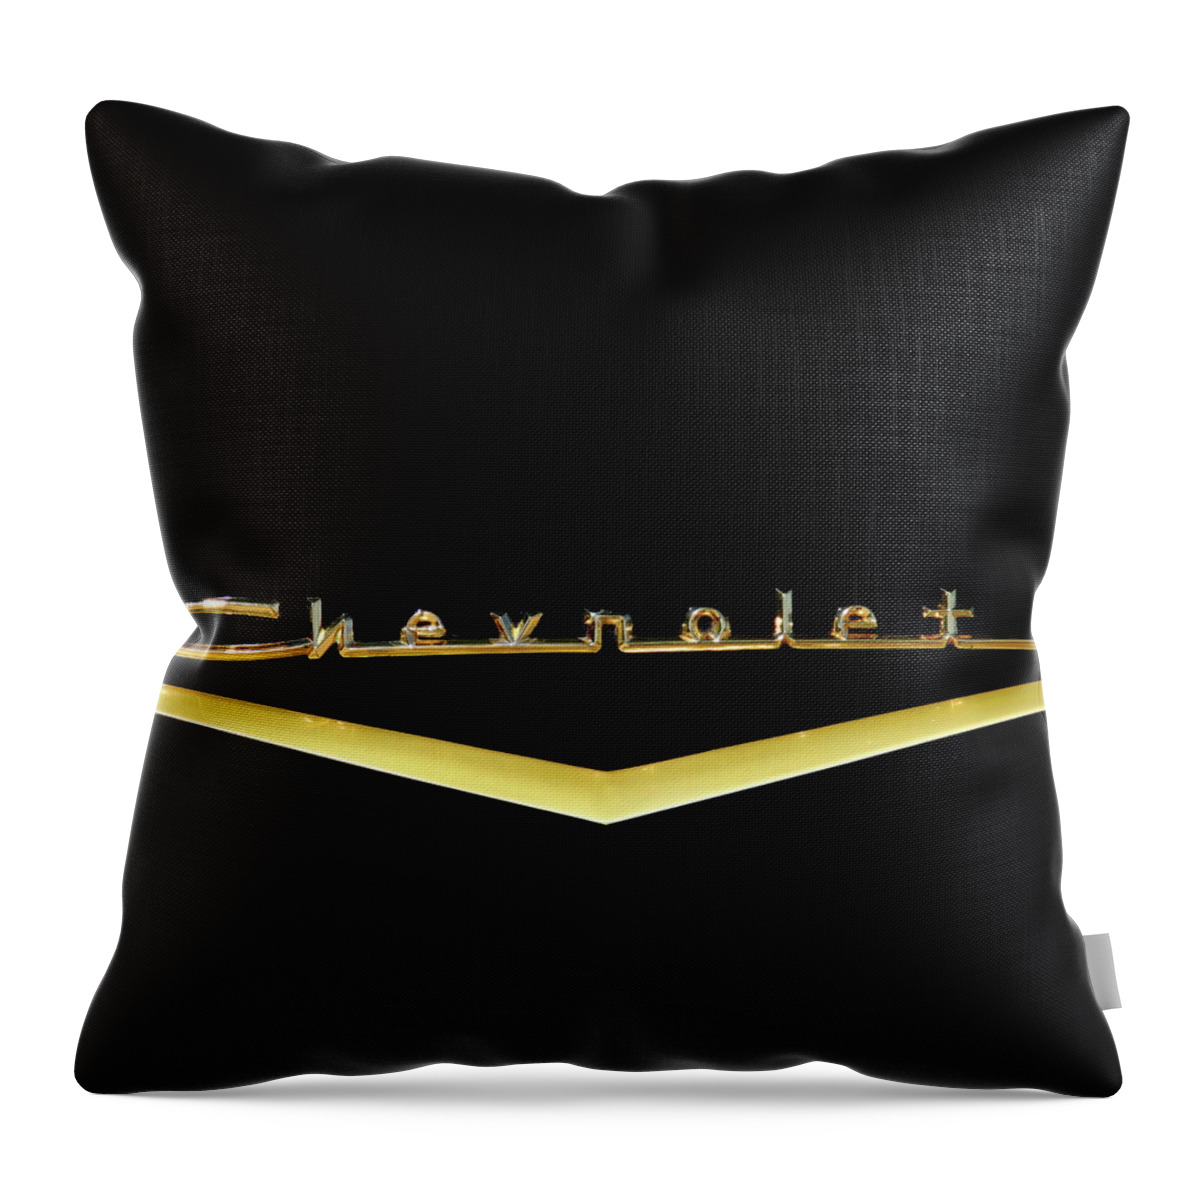 Chevy Bel Air Throw Pillow featuring the photograph Golden Chevy by Lens Art Photography By Larry Trager